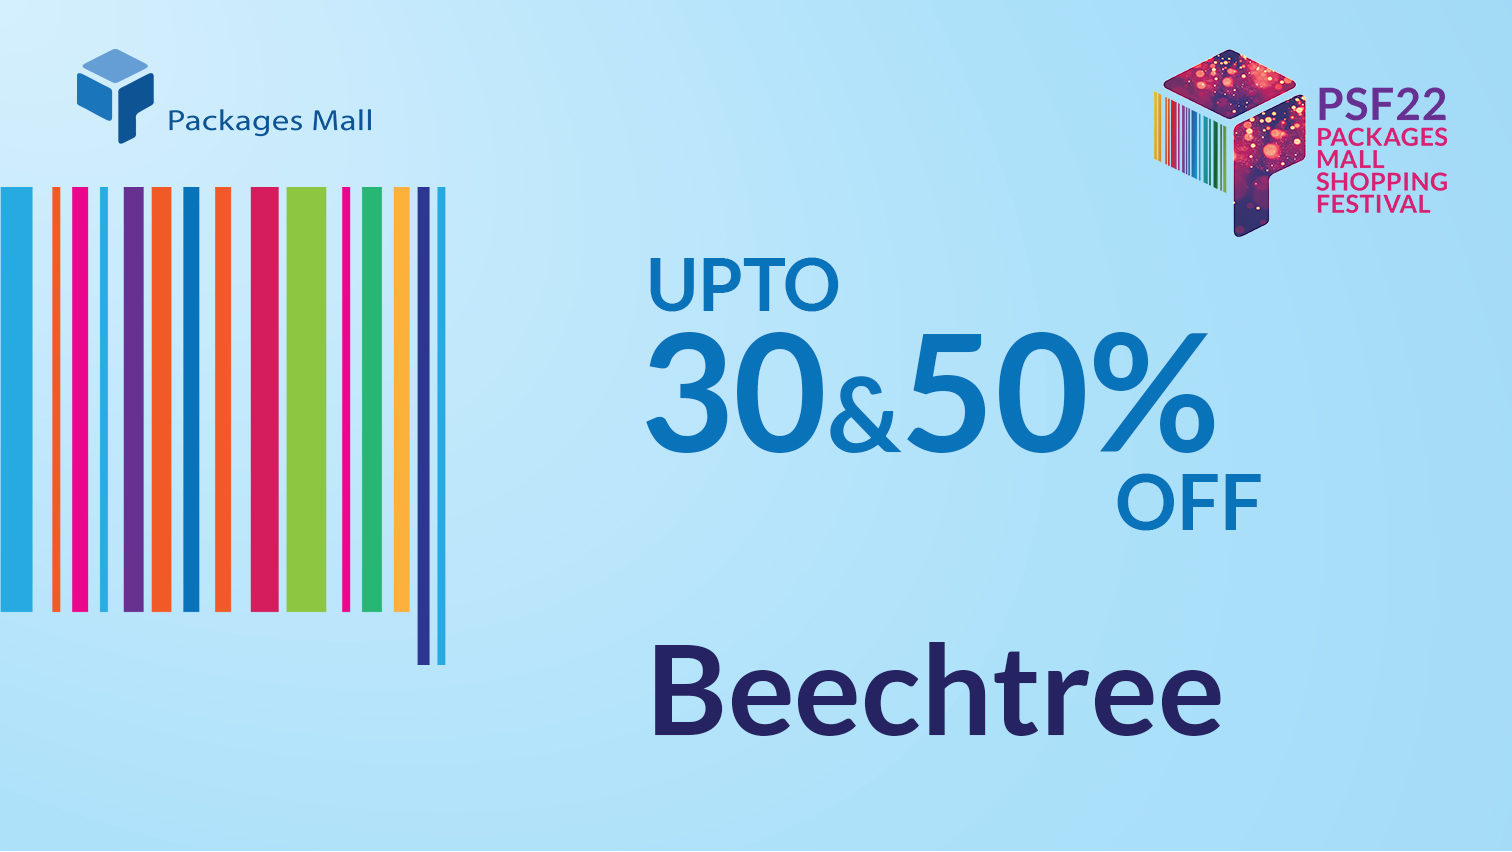 Beechtree Shopping Festival Packages Mall